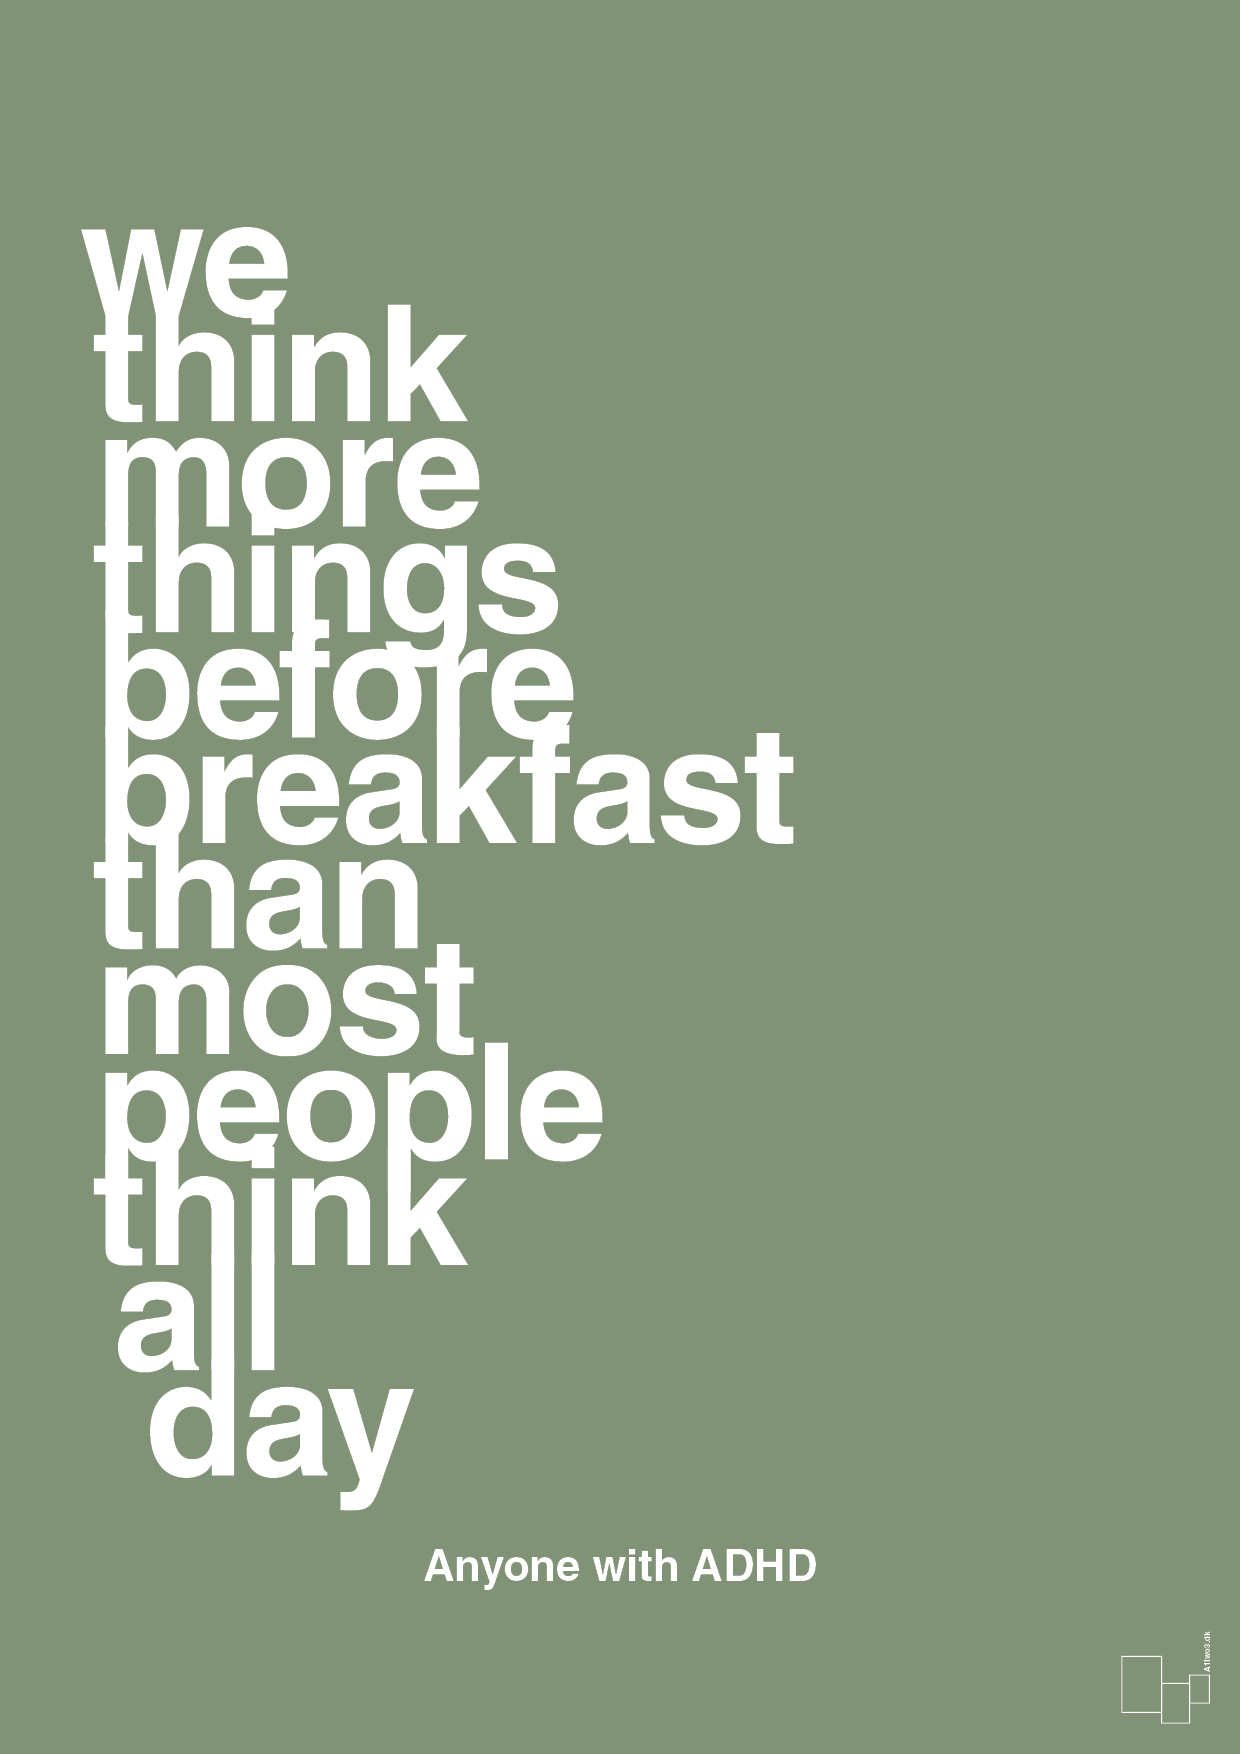 we think more things before breakfast than most people think all day - Plakat med Samfund i Jade